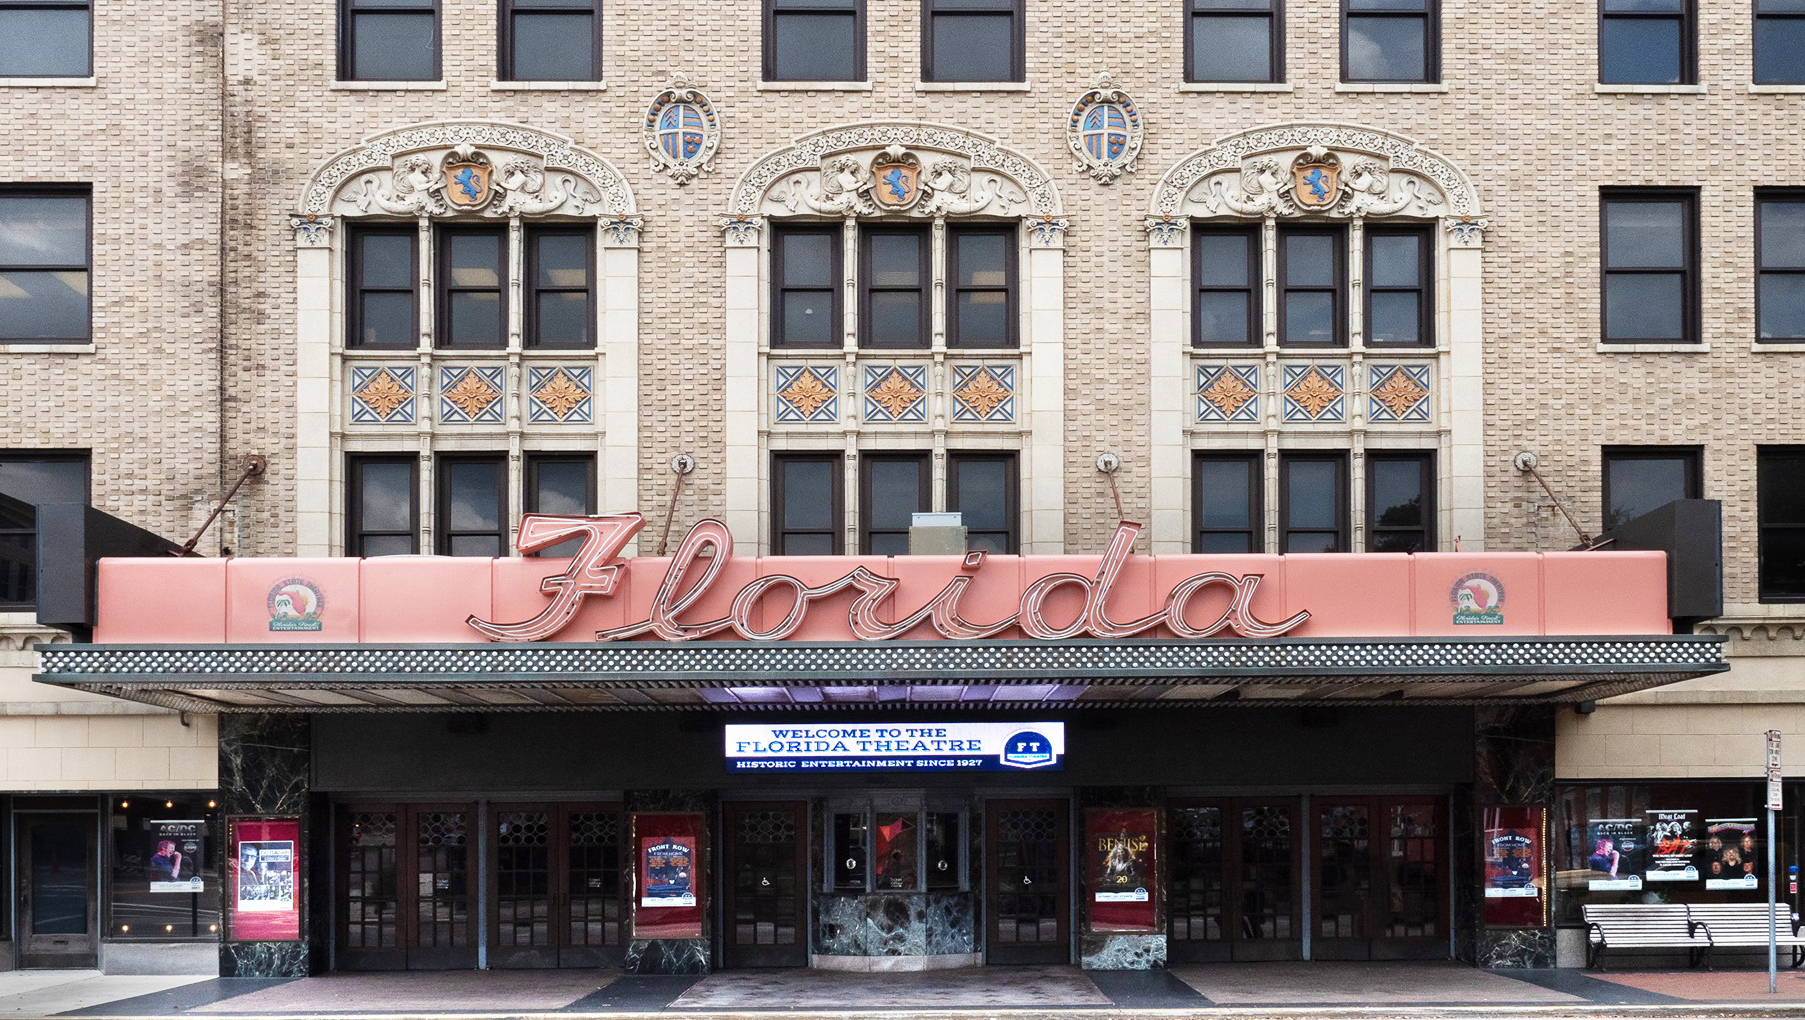 By Dec. 31, the Florida Theatre will have presented more than 80 shows in 2021.